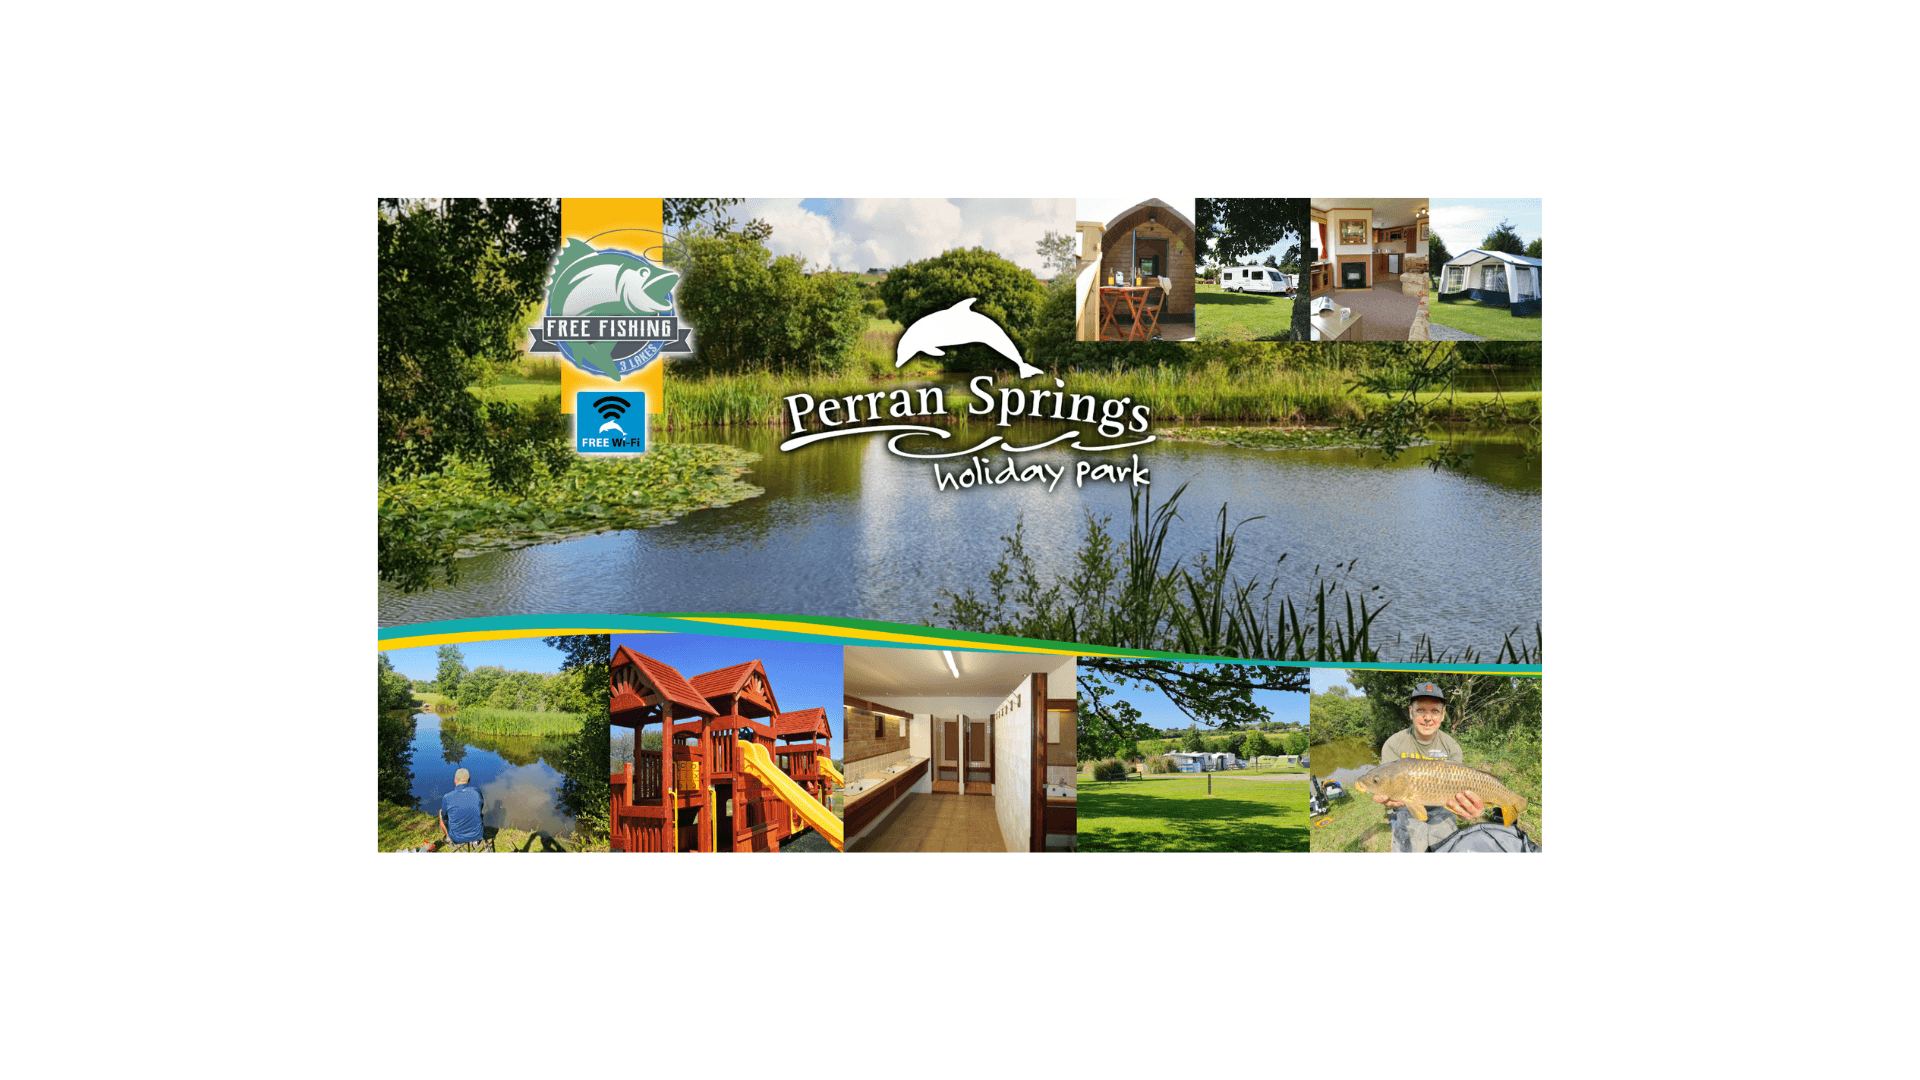 Family-run Park, FREE Wi-Fi, FREE FISHING, Play Areas, Pets Welcome. Camping, Touring and Accommodation.